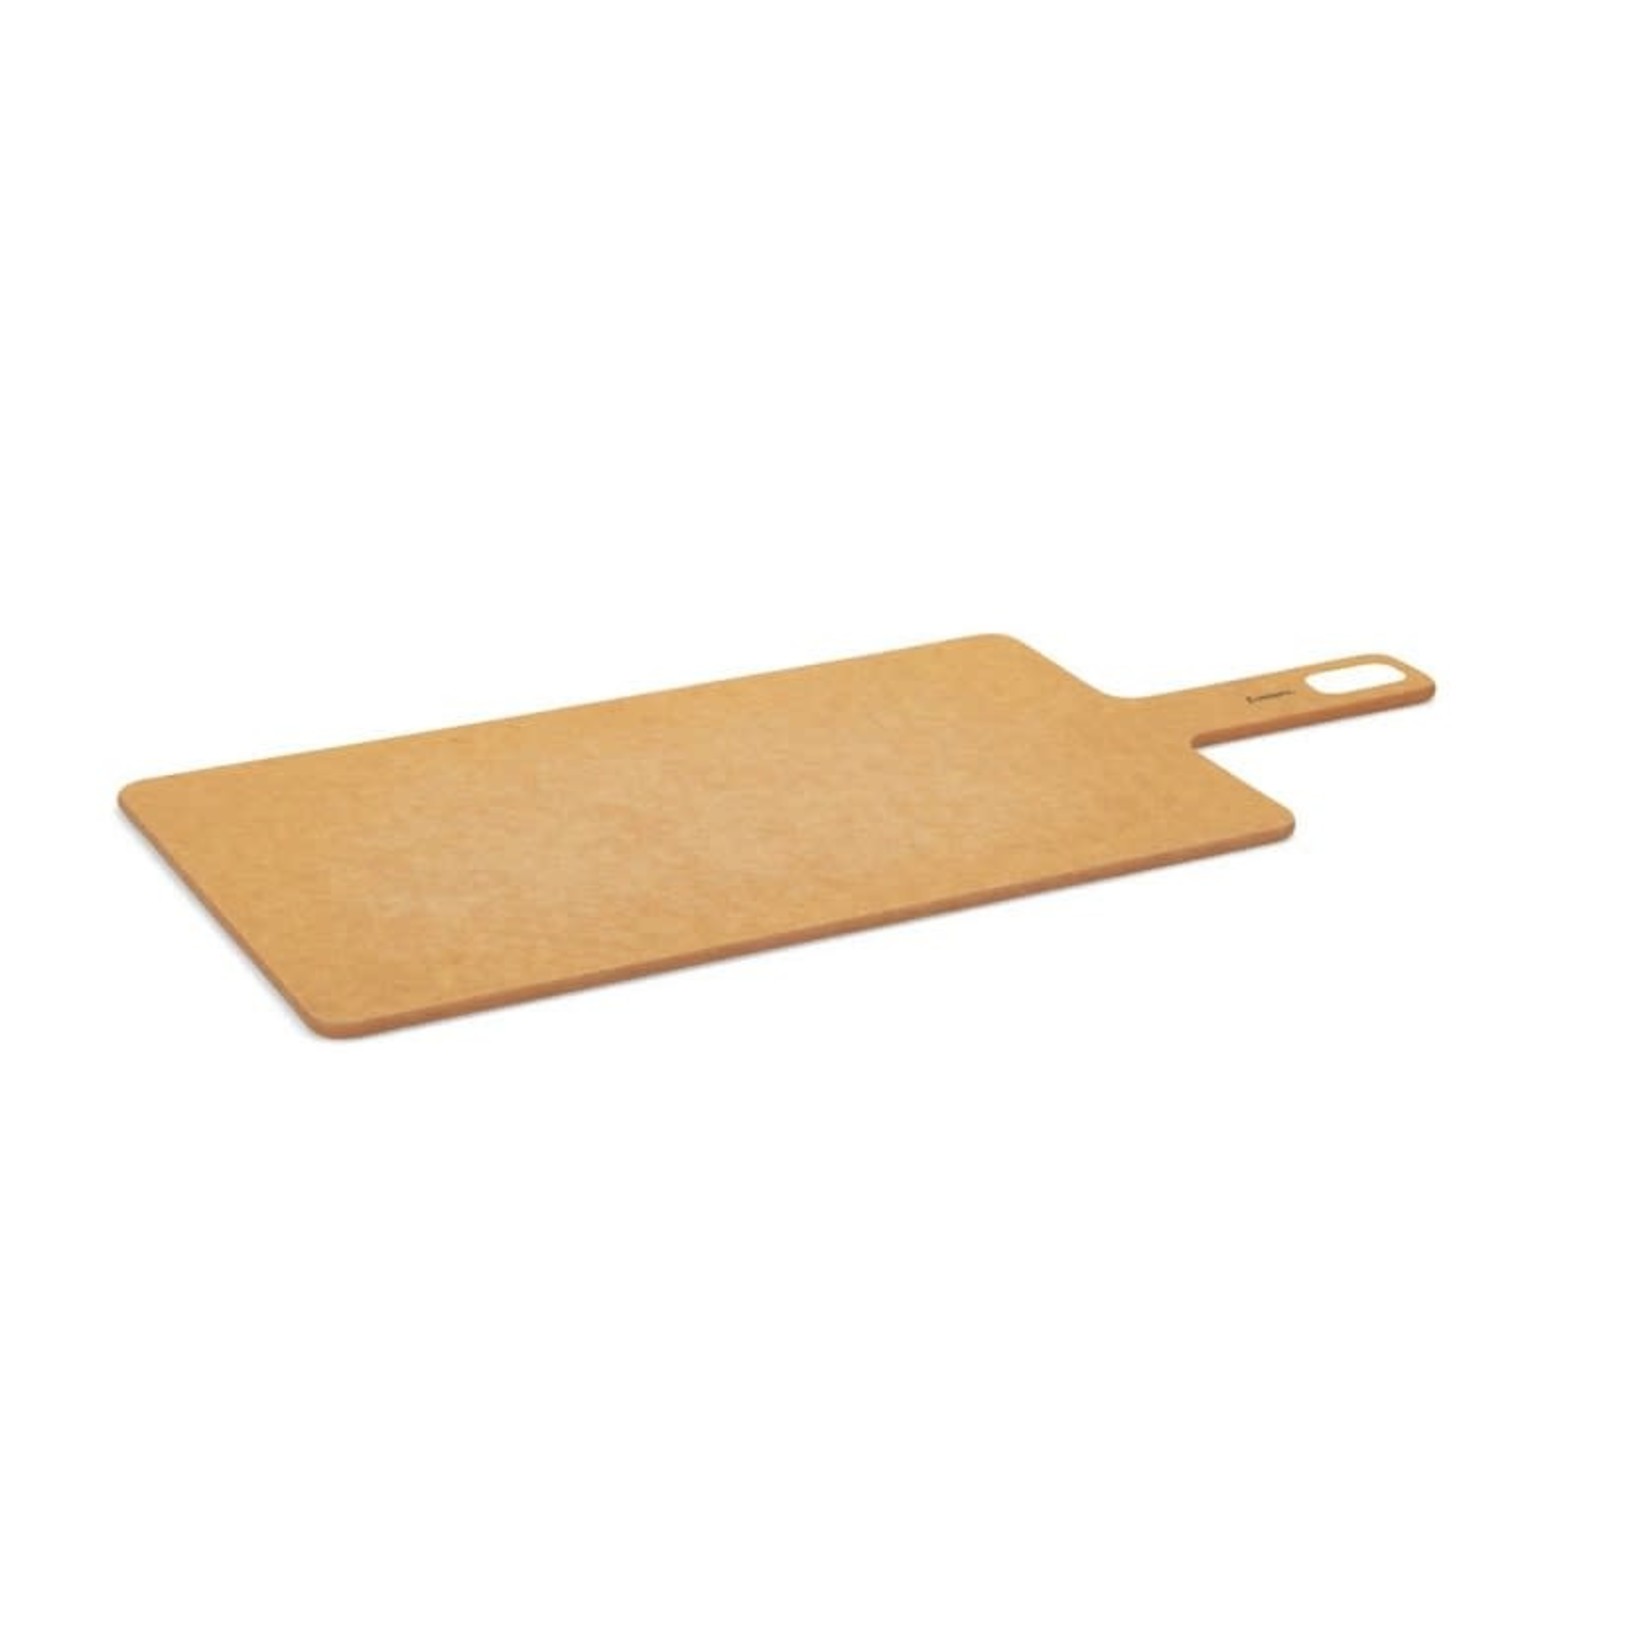 CUISIPRO CUISIPRO Fibre Wood Board with Handle 18x7.5"